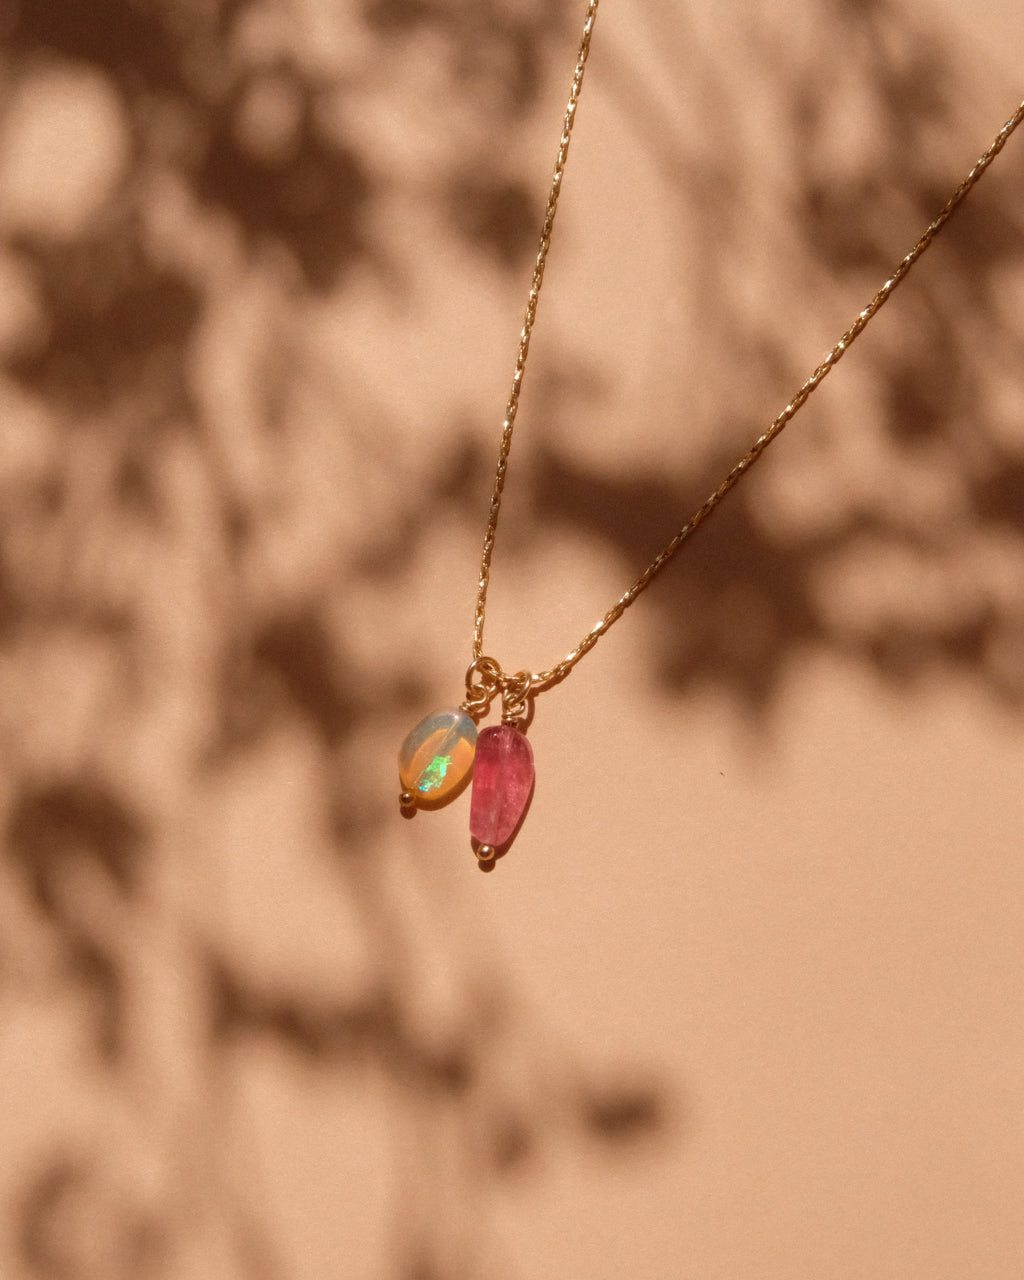 Echo of the Dreamer Opal and Tourmaline Necklace – Carol Henderson Gallery